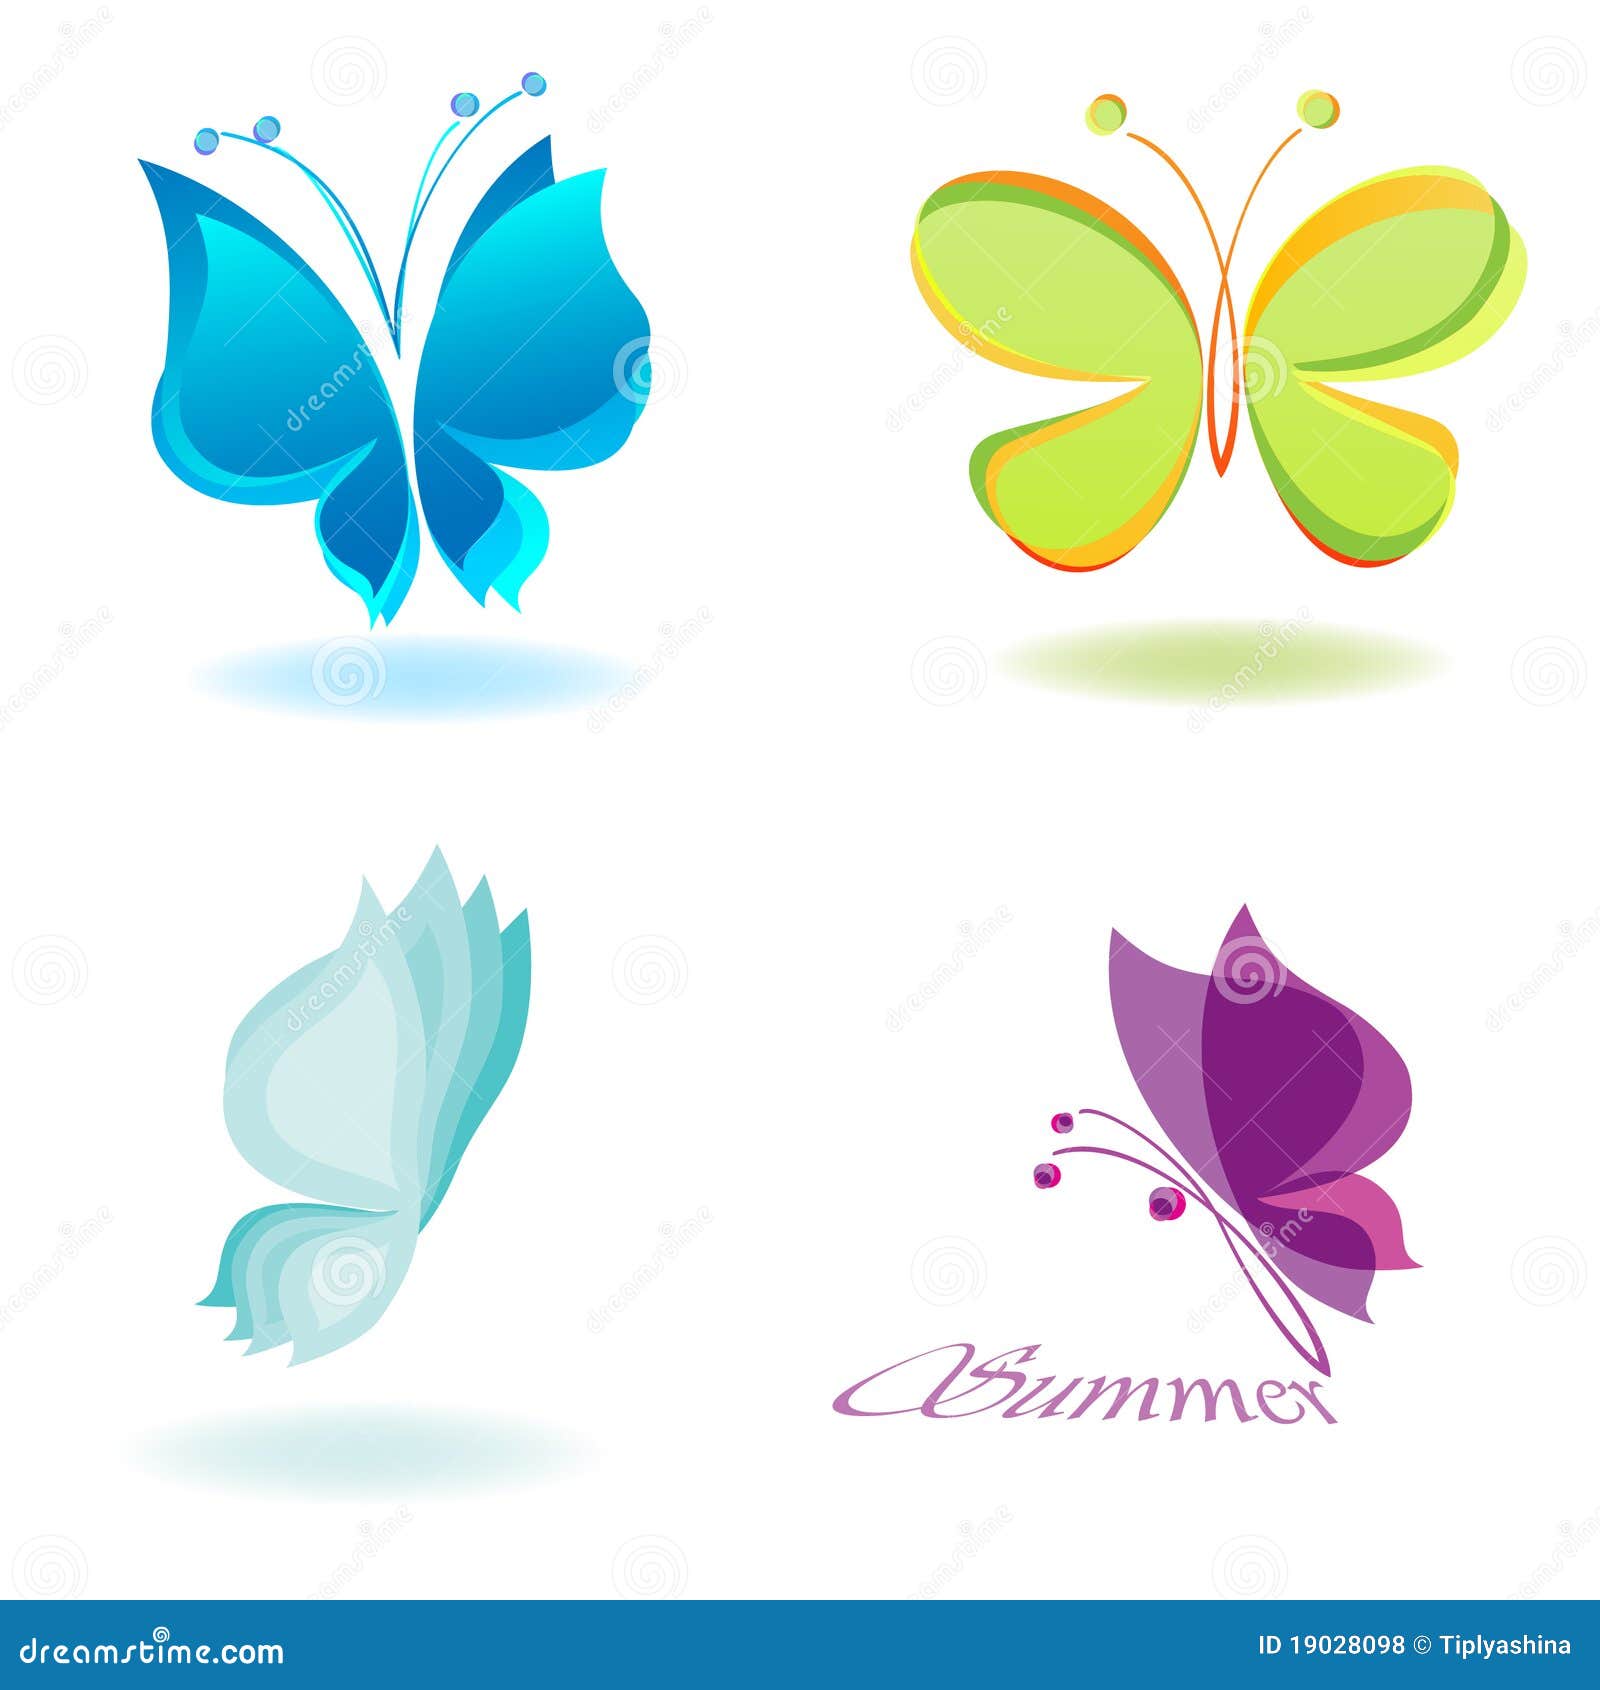 vector free download butterfly - photo #32